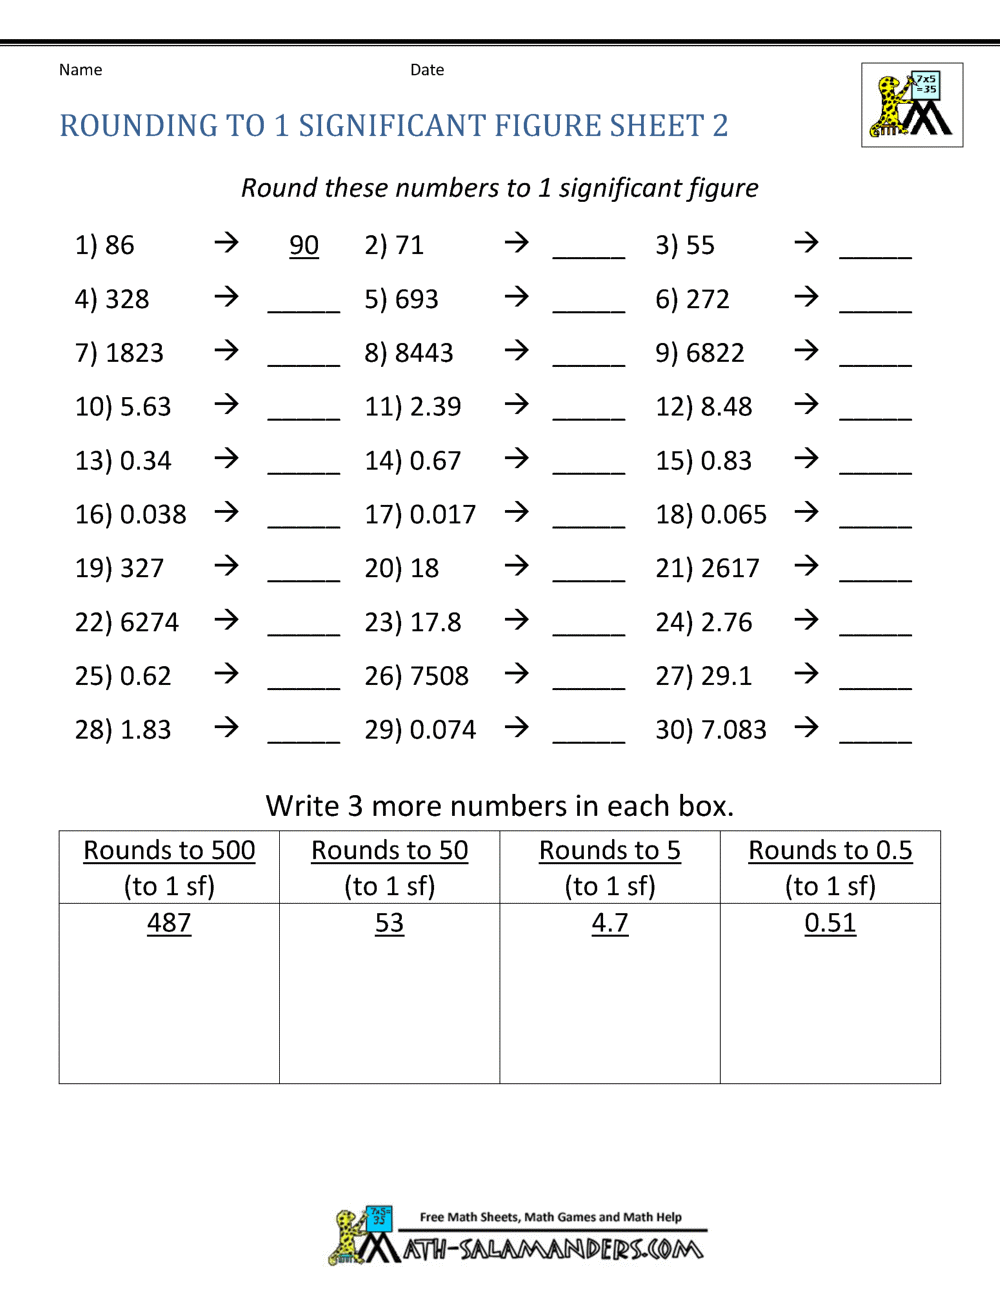 Rounding Significant Figures For Calculations Using Significant Figures Worksheet